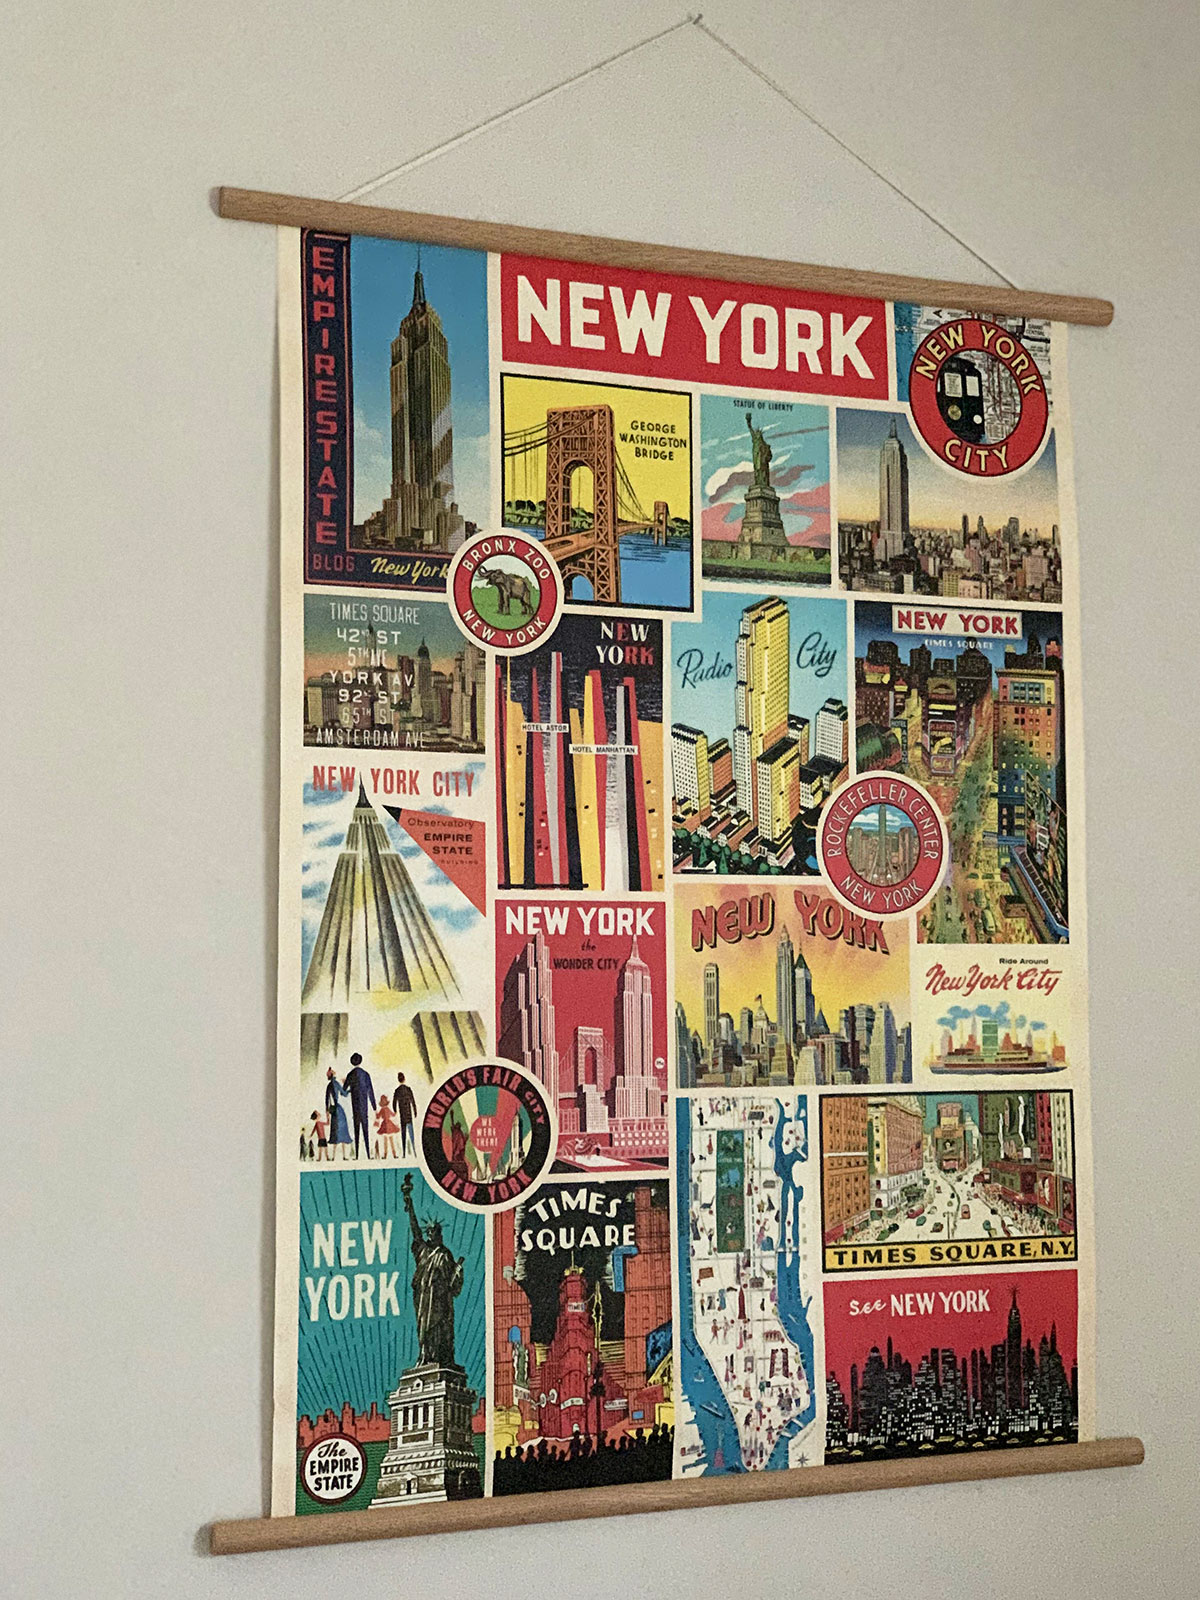 Vintage inspired New York themed poster by Cavallini & Co.